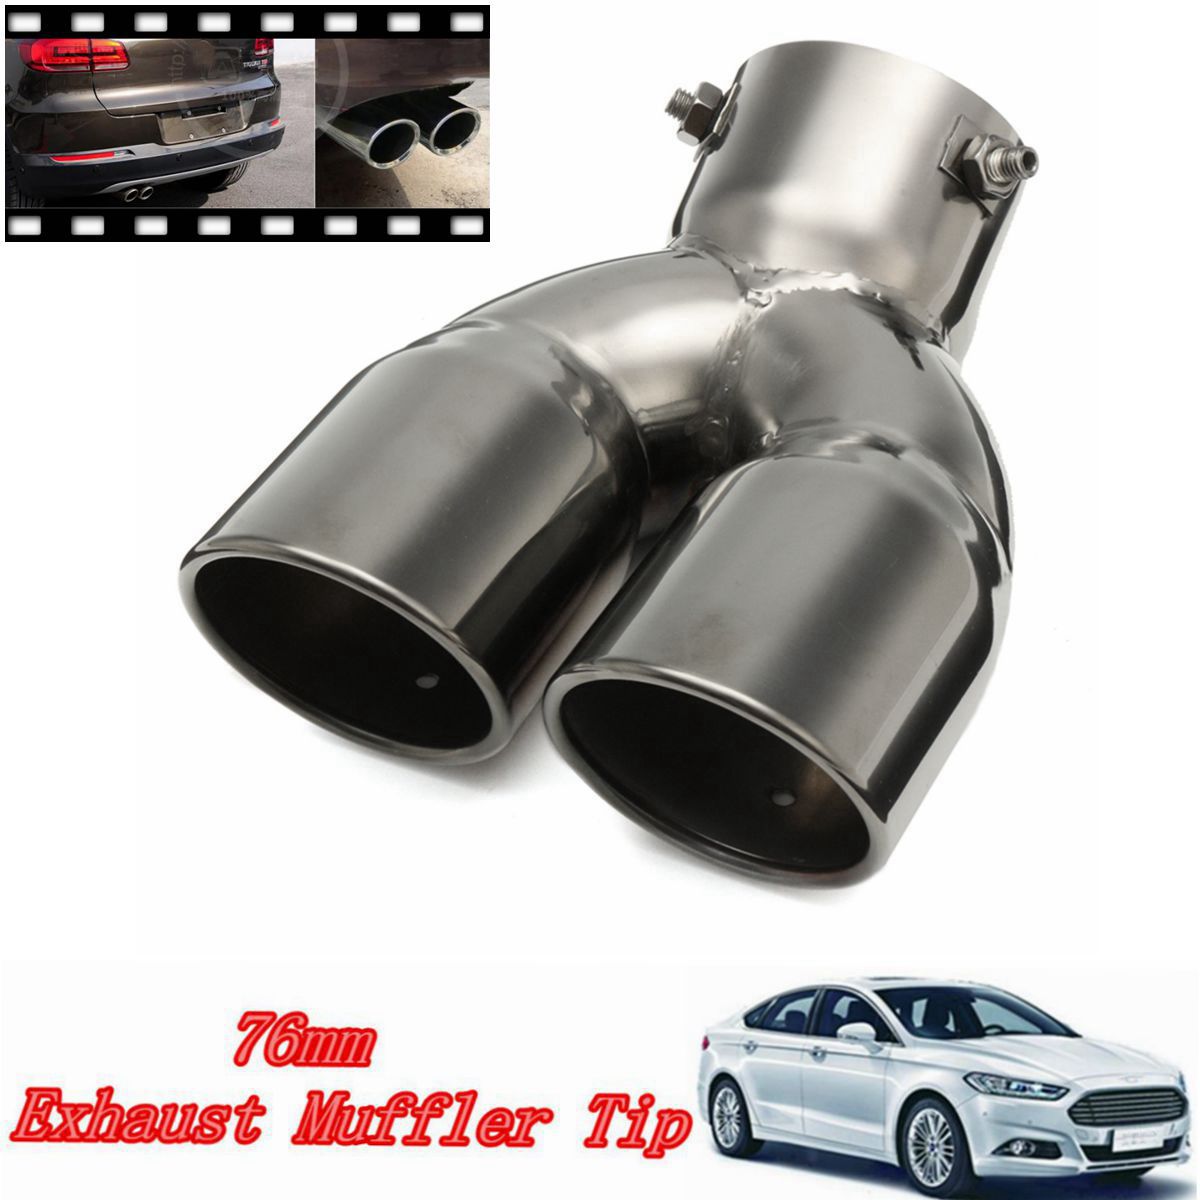 76mm-3-Inch-Universal-Car-Stainless-Twin-Double-Chrome-Exhaust-Pipe-Muffler-Tail-Tip-1365496